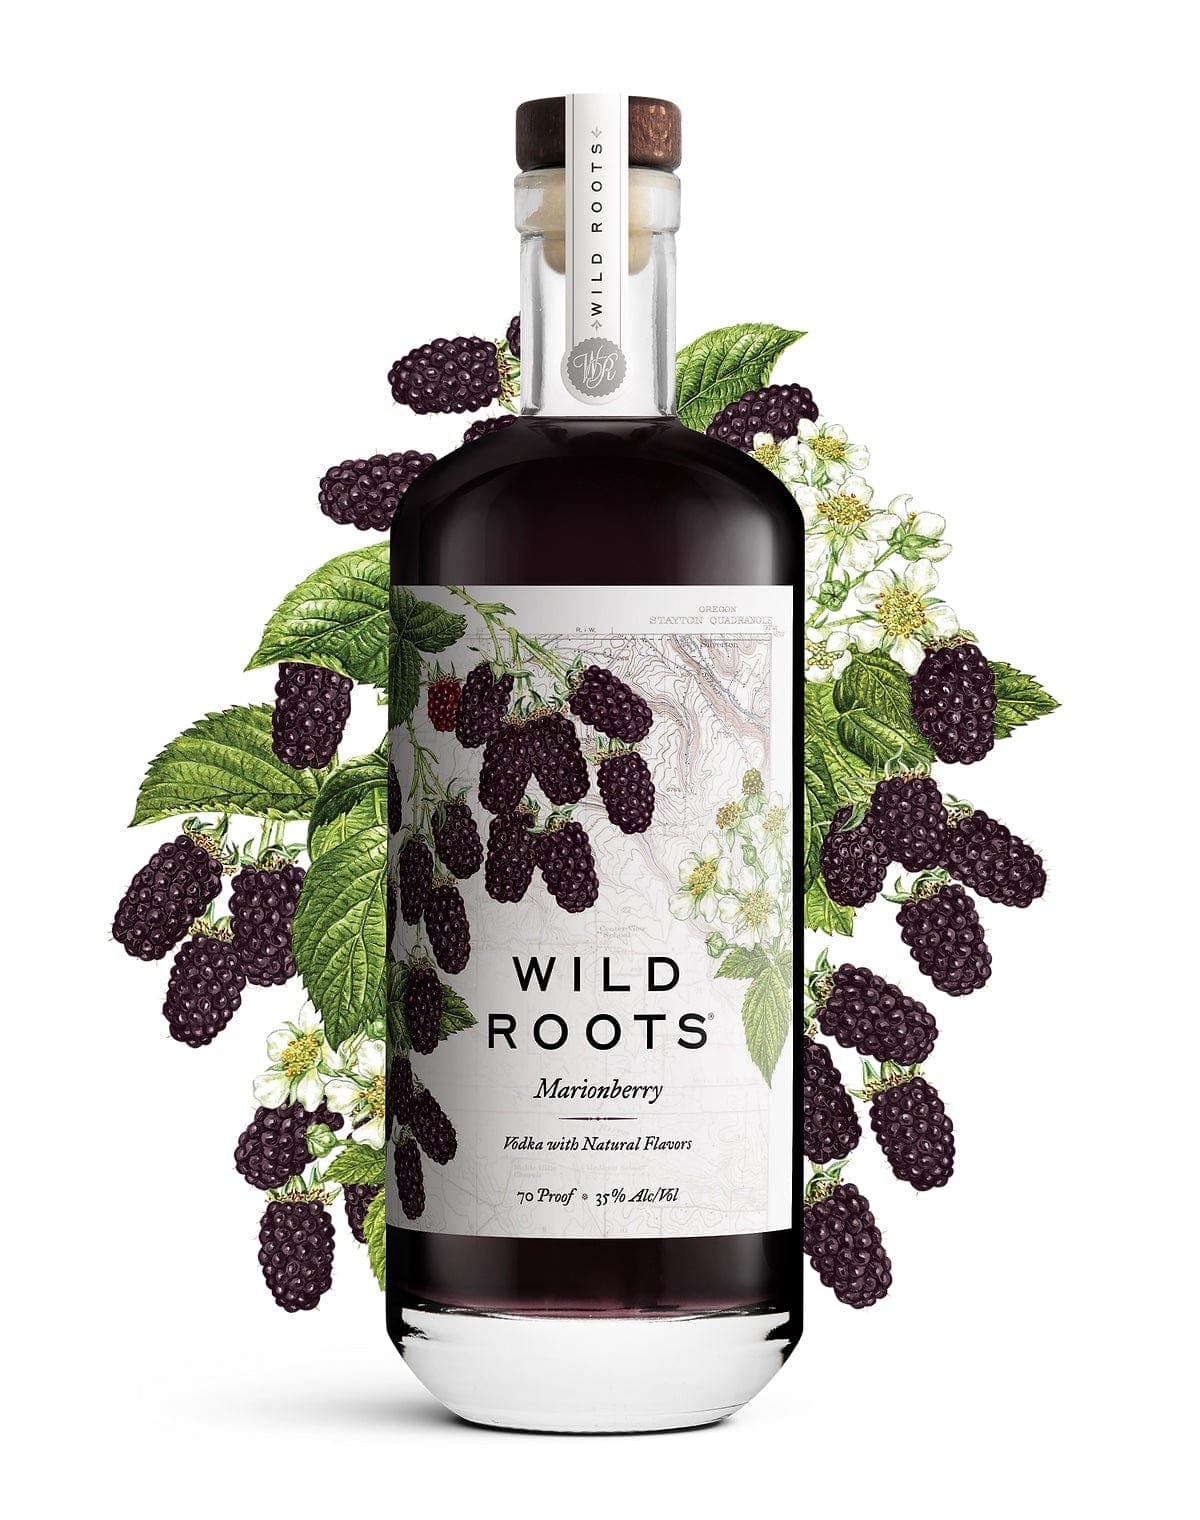 Wild Roots Marionberry - Barbank